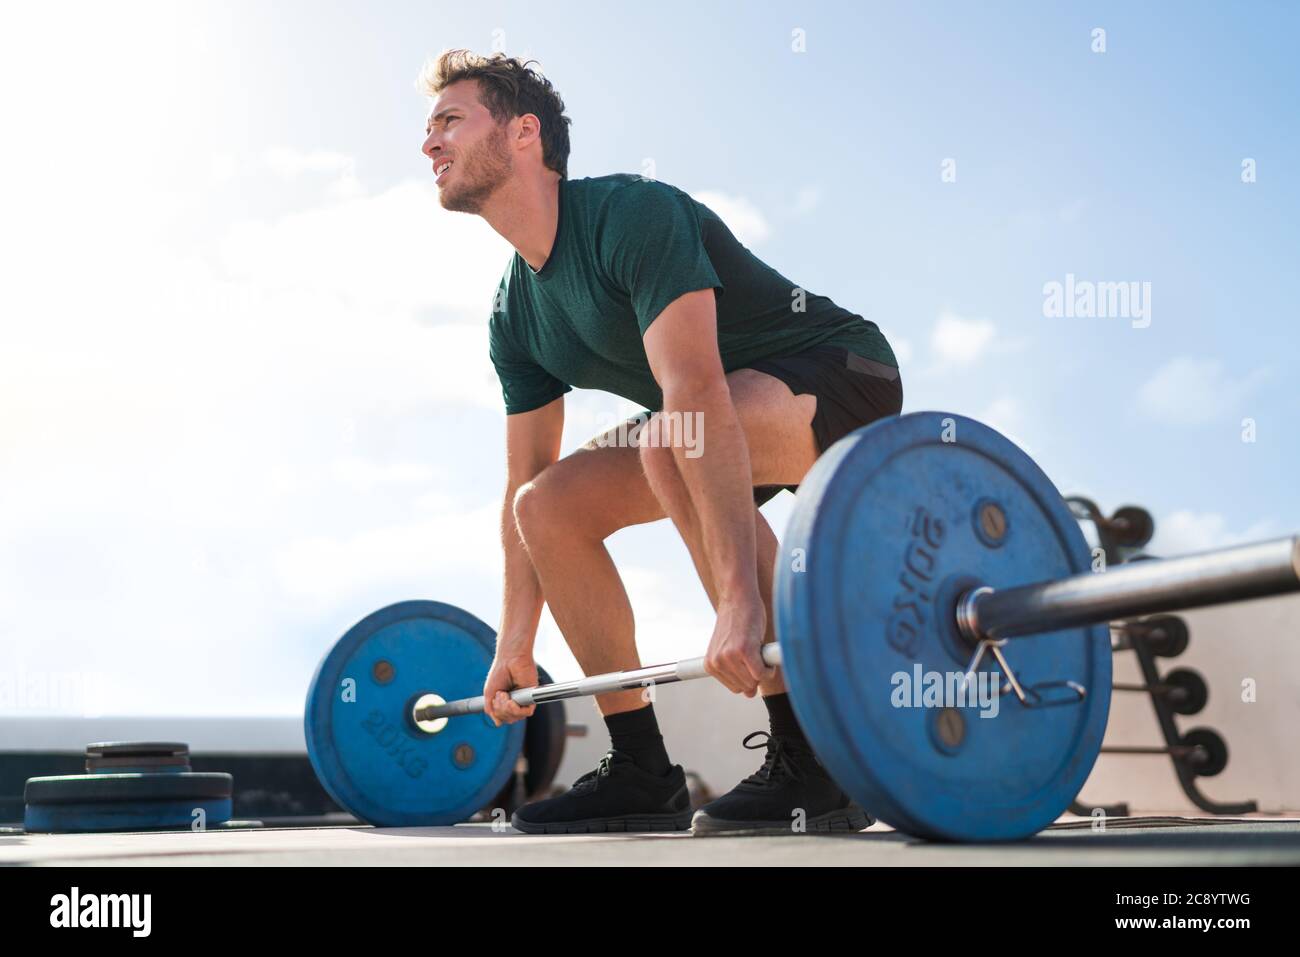 Weightlifting fitness man bodybuilding Stock Photo